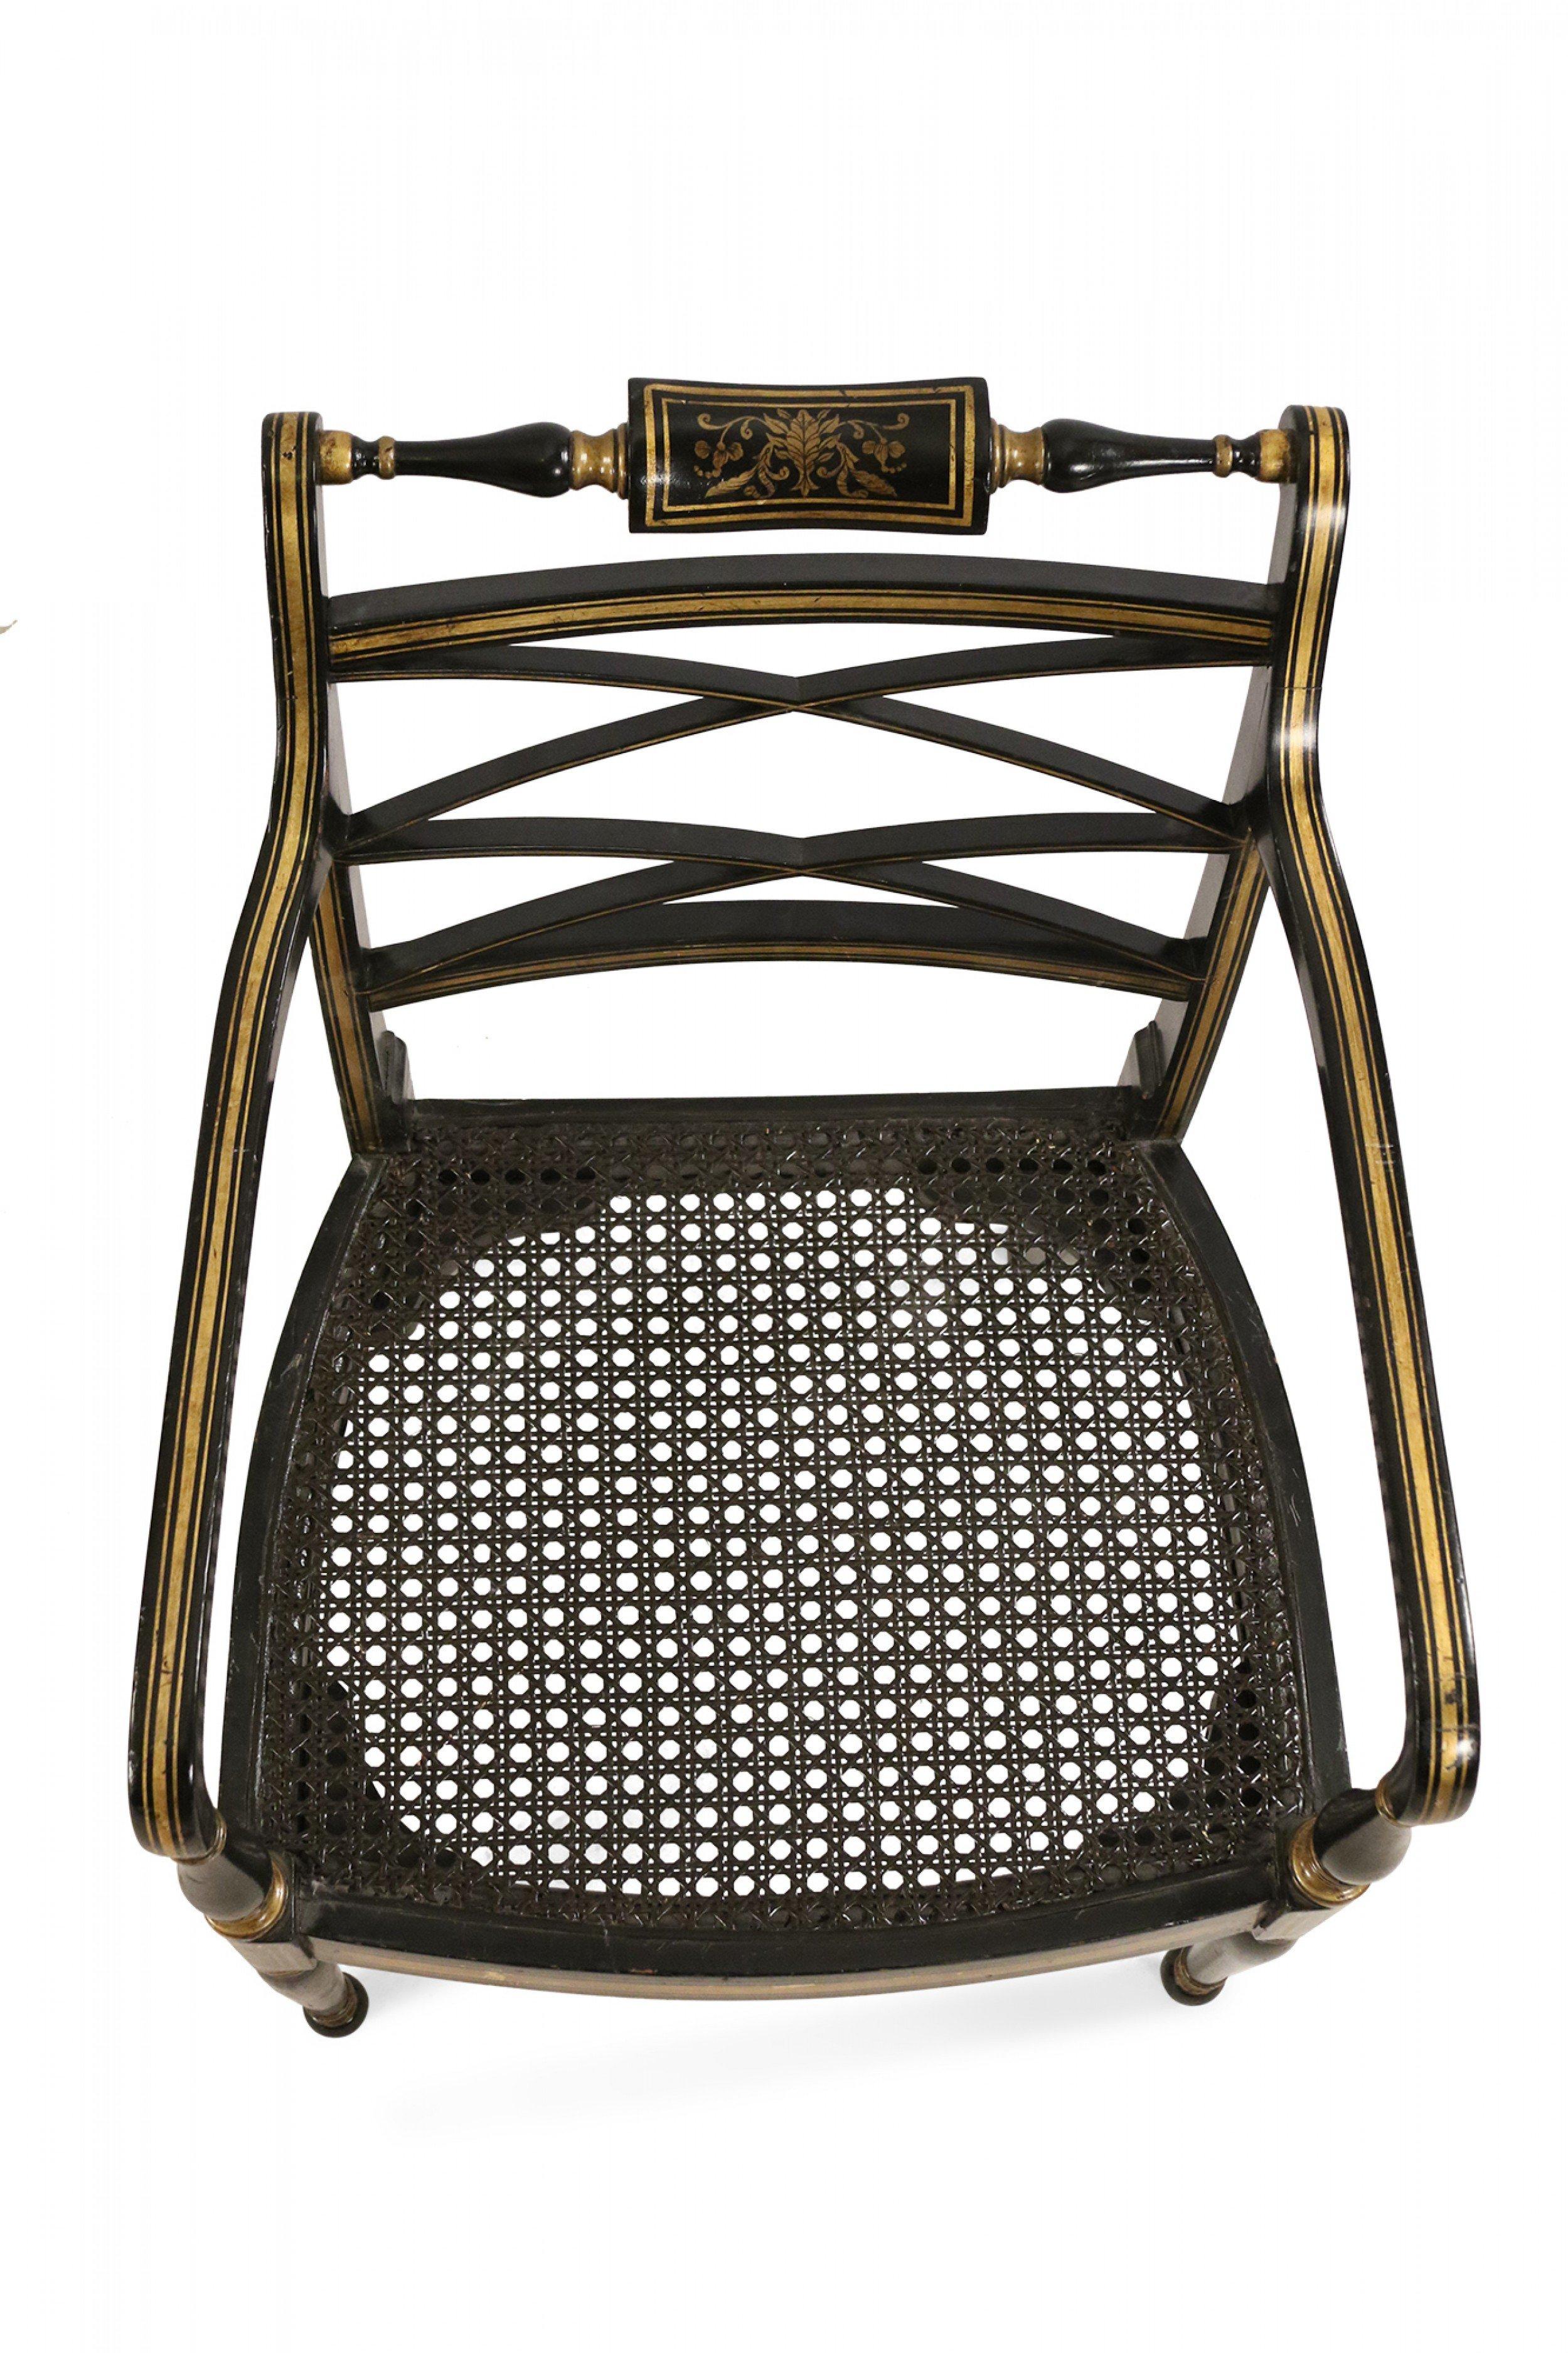 English Regency Style Black and Gold Painted Cane Seat Side Chair For Sale 2